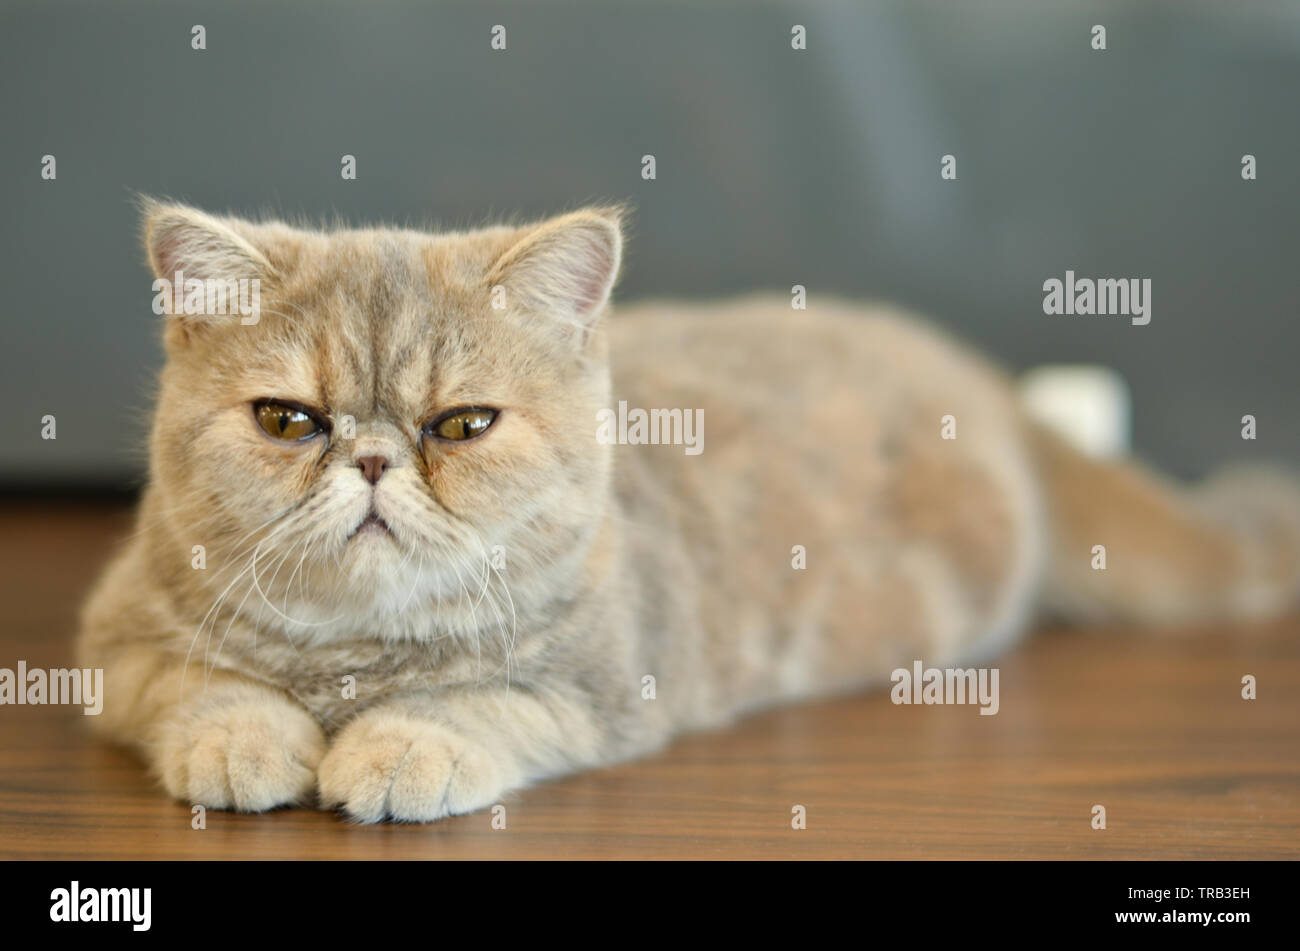 Angry cat meme Cut Out Stock Images & Pictures - Alamy